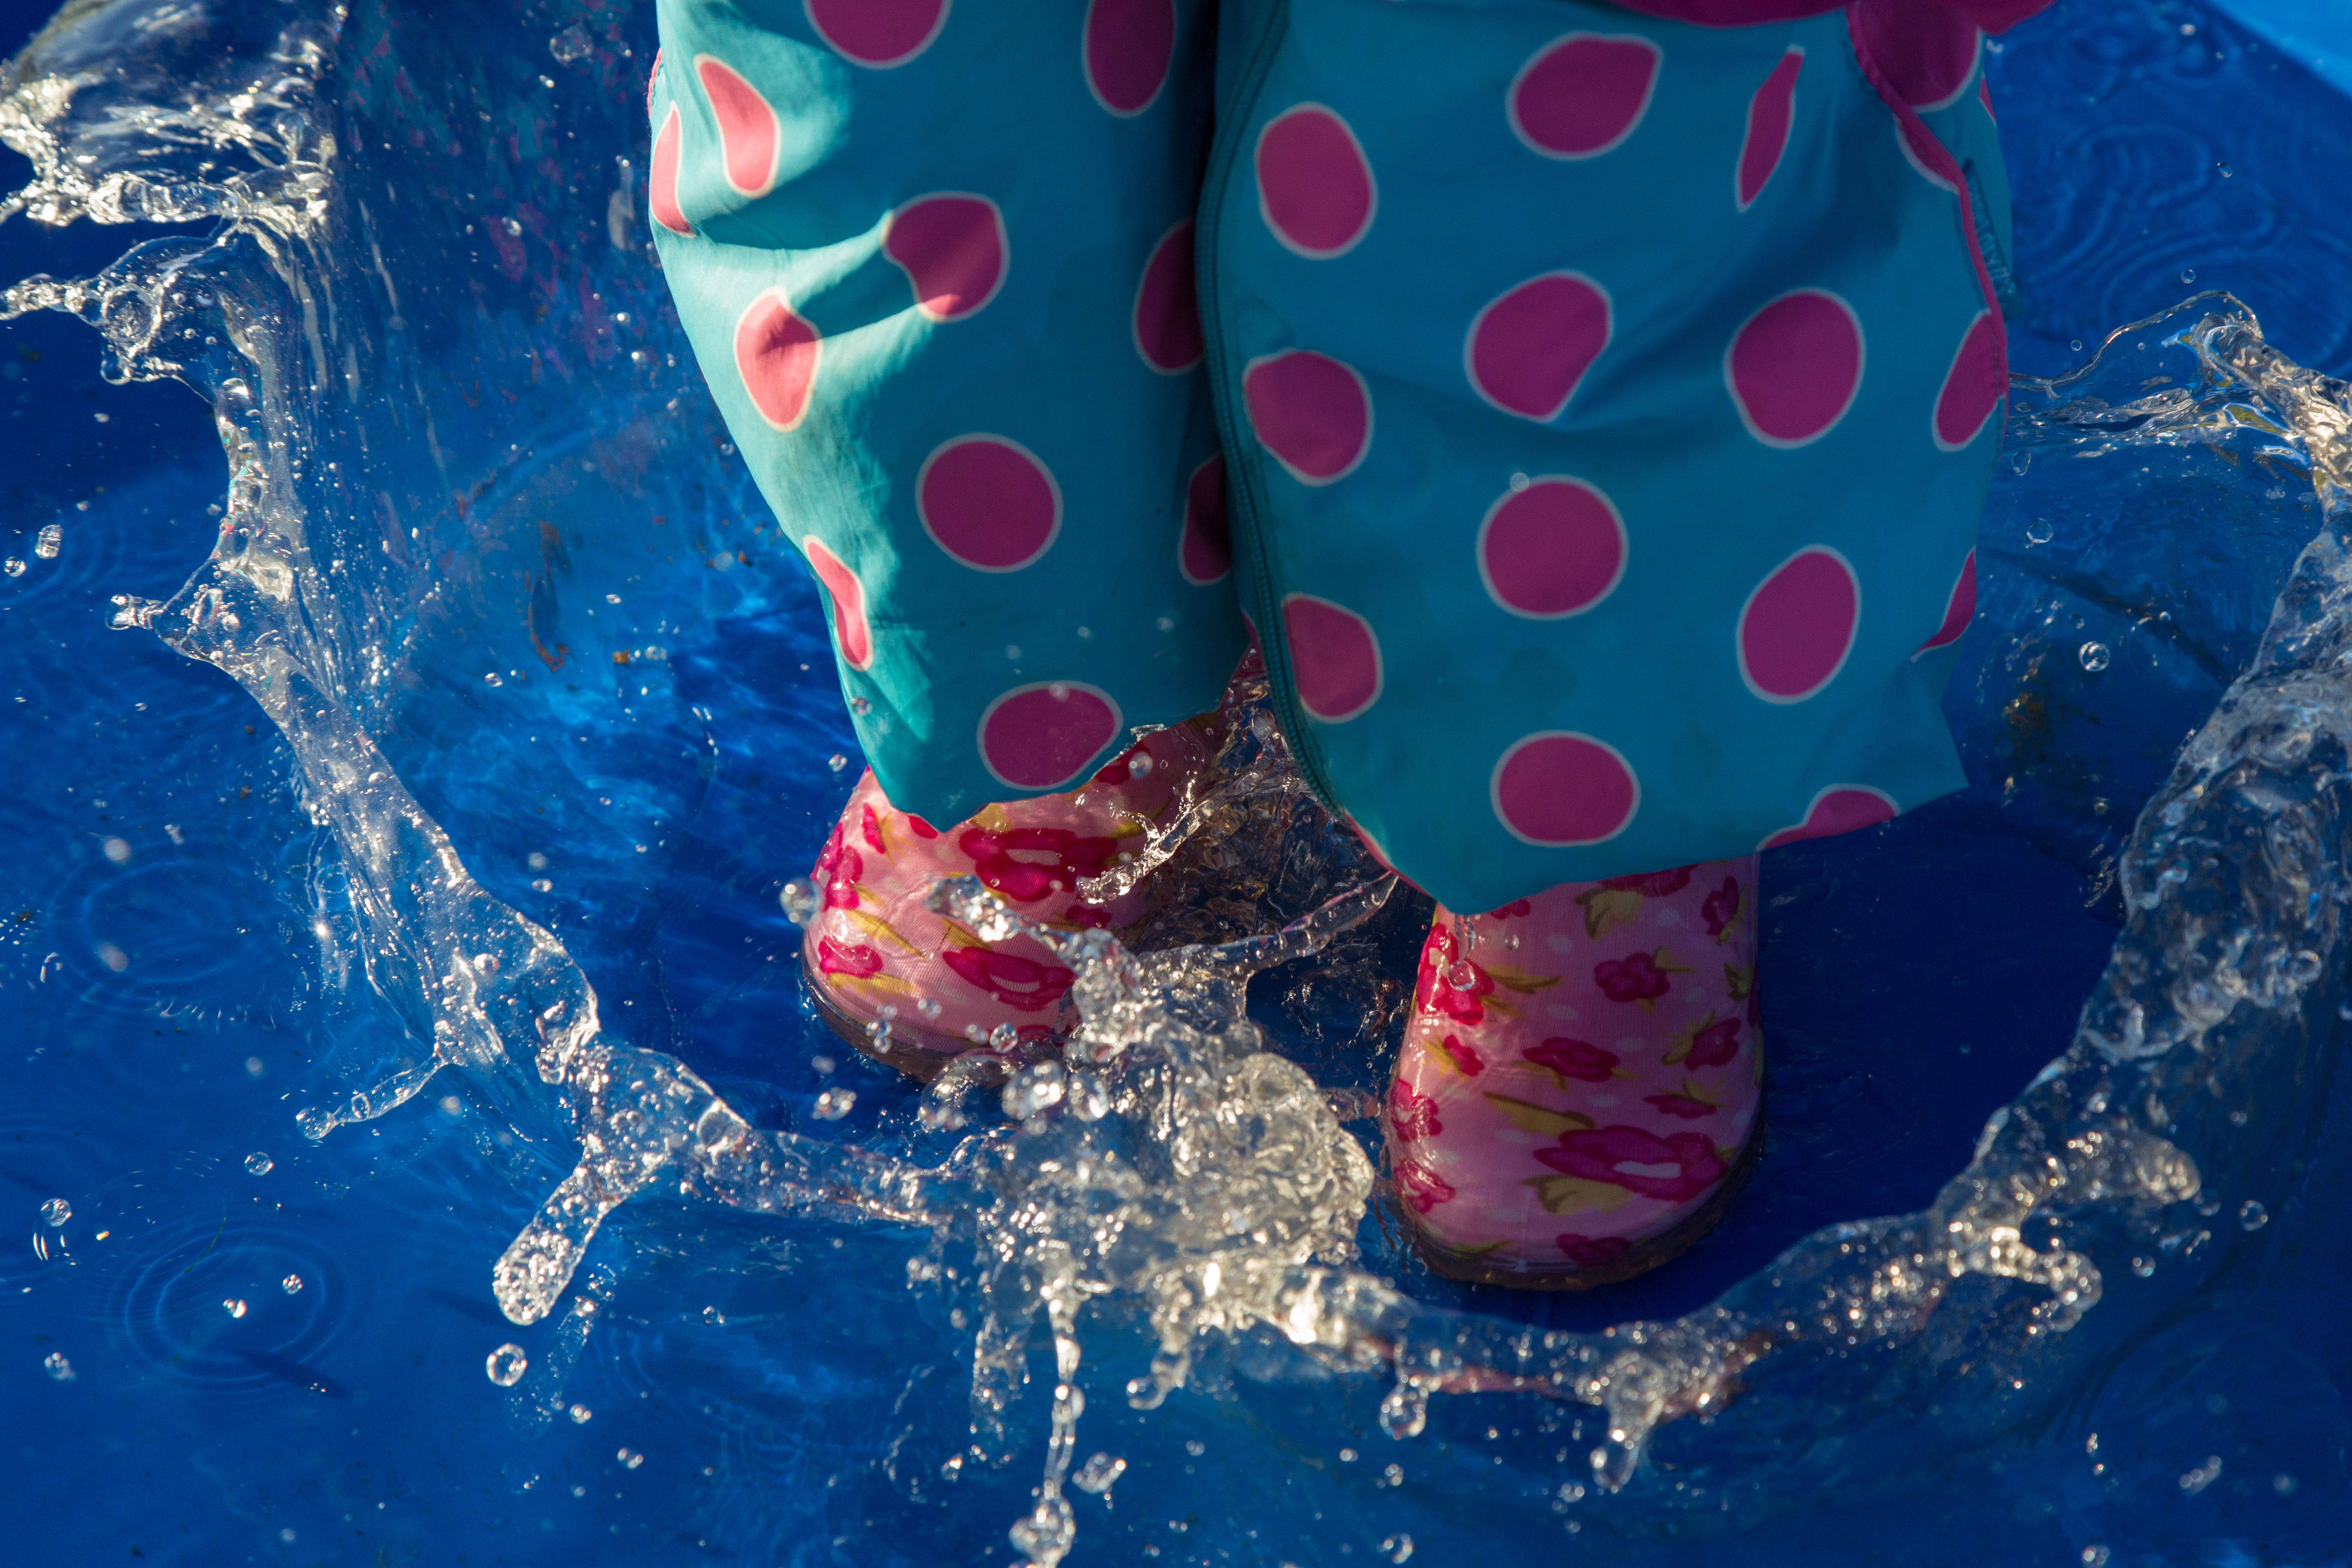 Have a splashing time February half term at the London Puddle Jumping Championships 